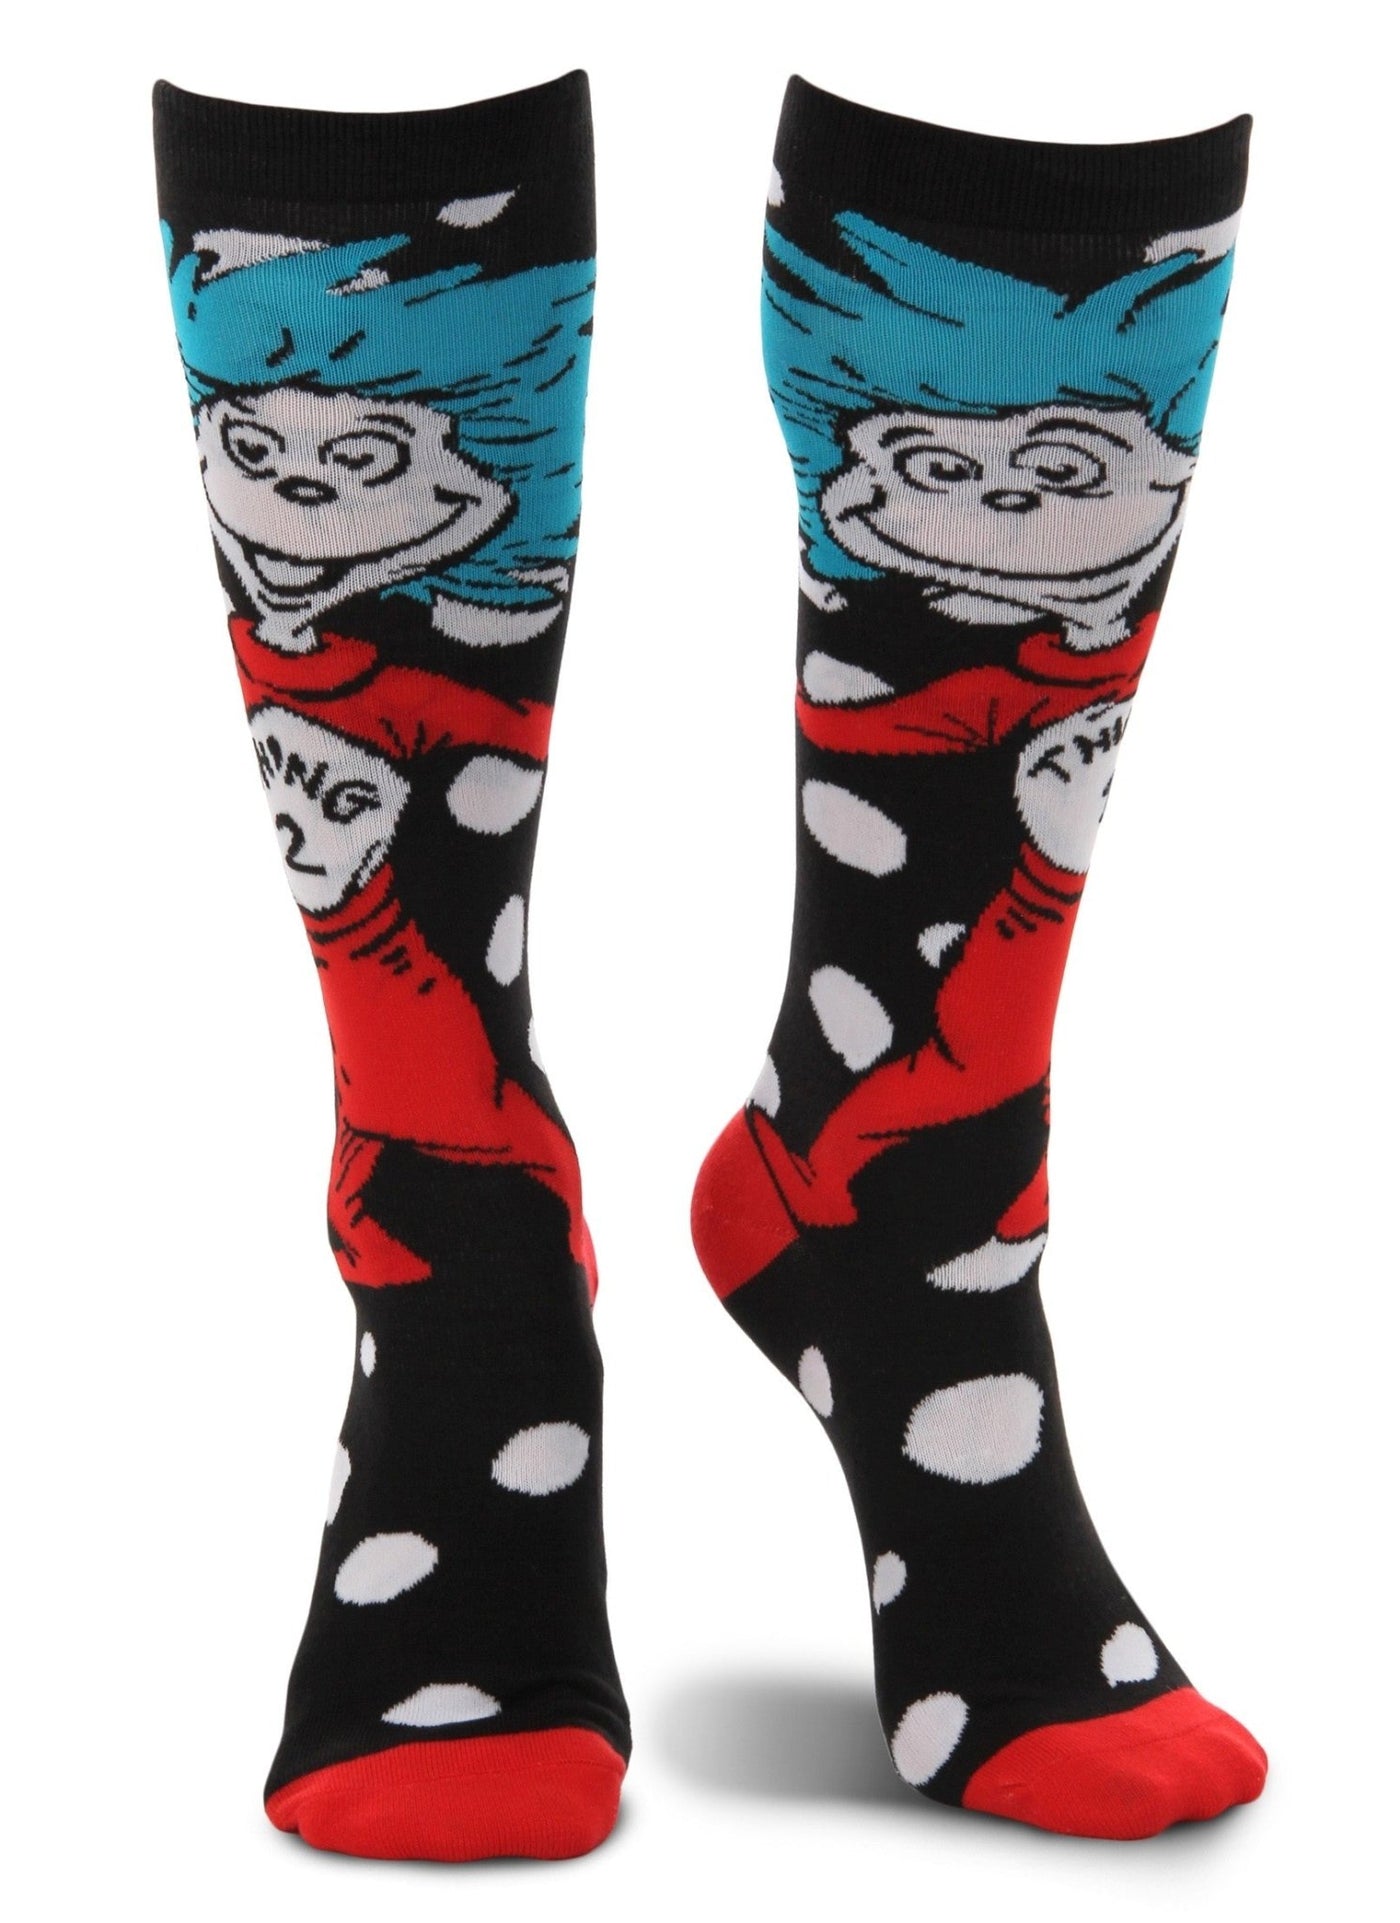 Dr. Seuss Thing 1&2 Knee High Costume Socks - JJ's Party House